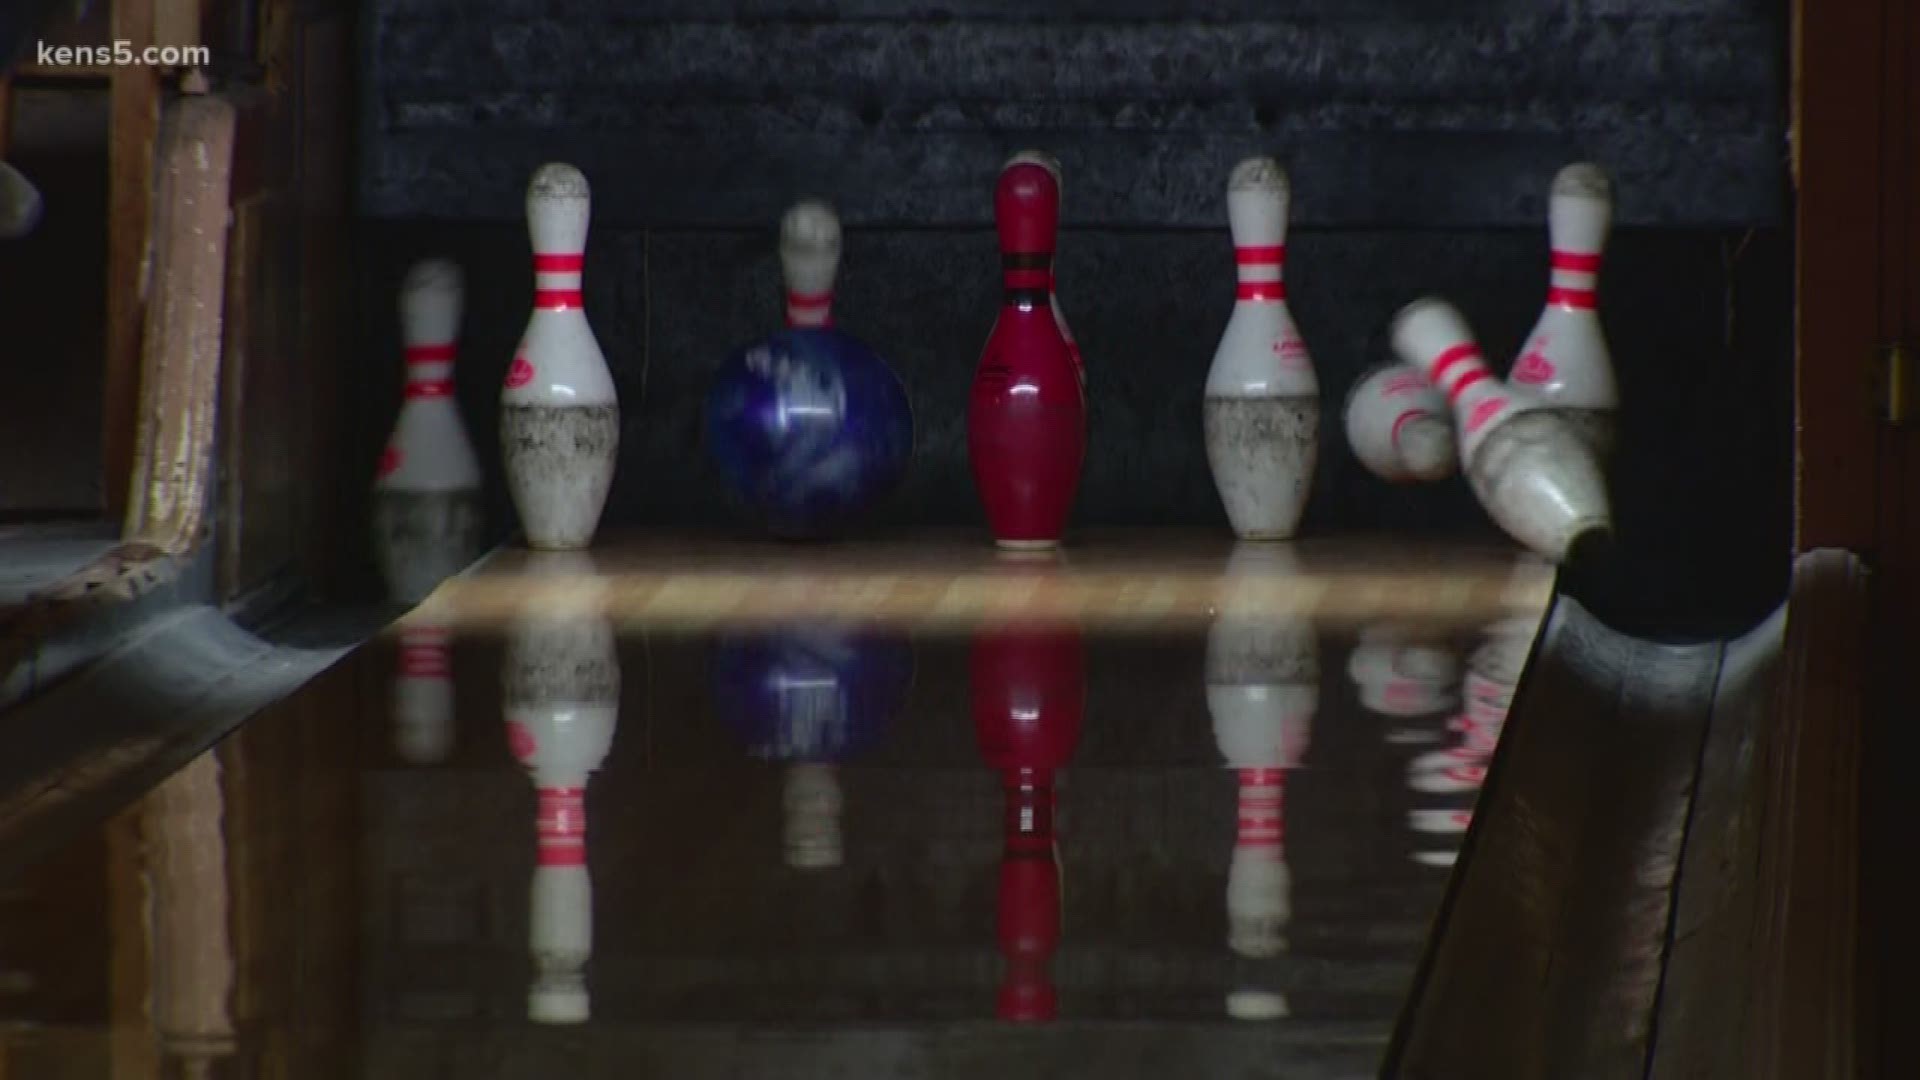 Brought to the U.S. in the 1880's and a staple of the prohibition era, nine-pin bowling now lives on only in Texas.